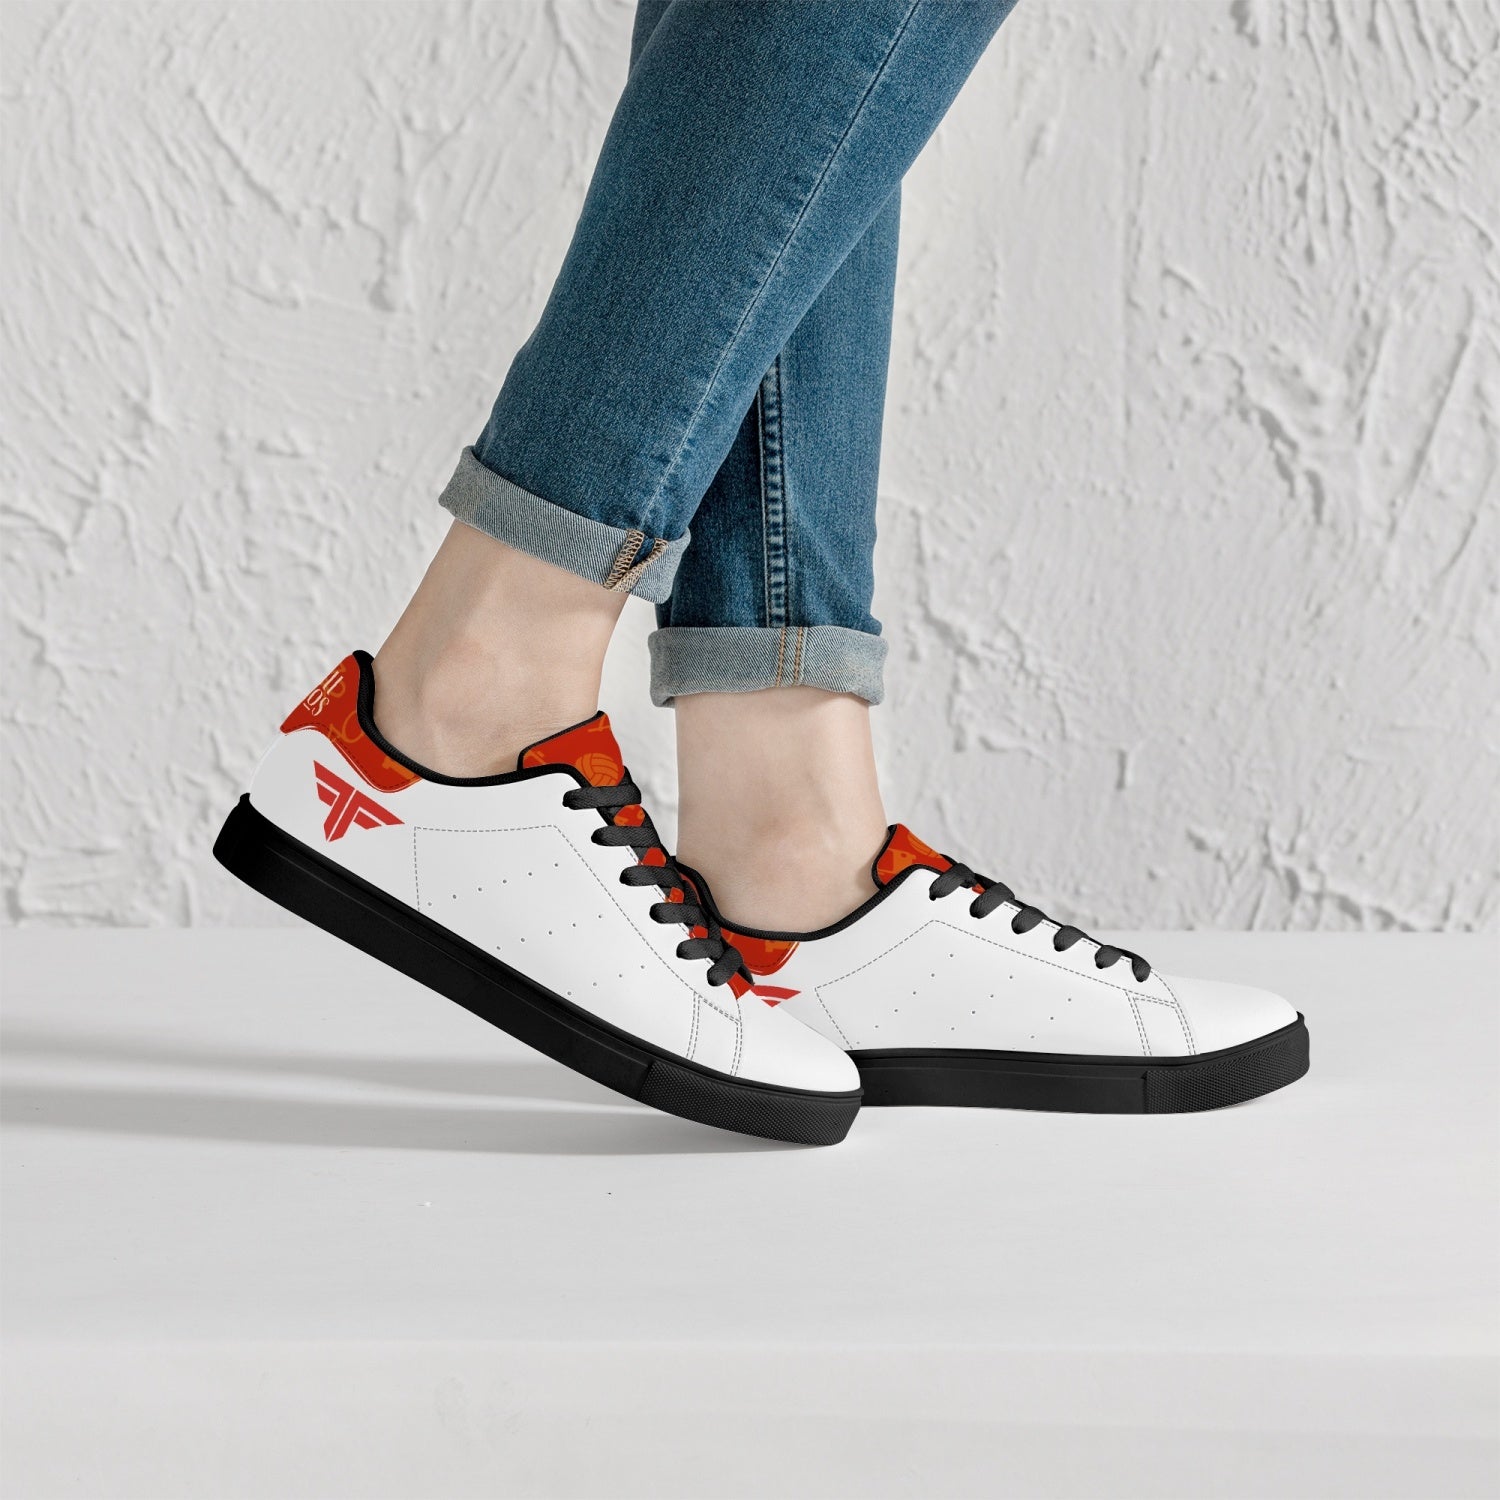 190. Classic Low-Top Leather Sneakers - White/Black